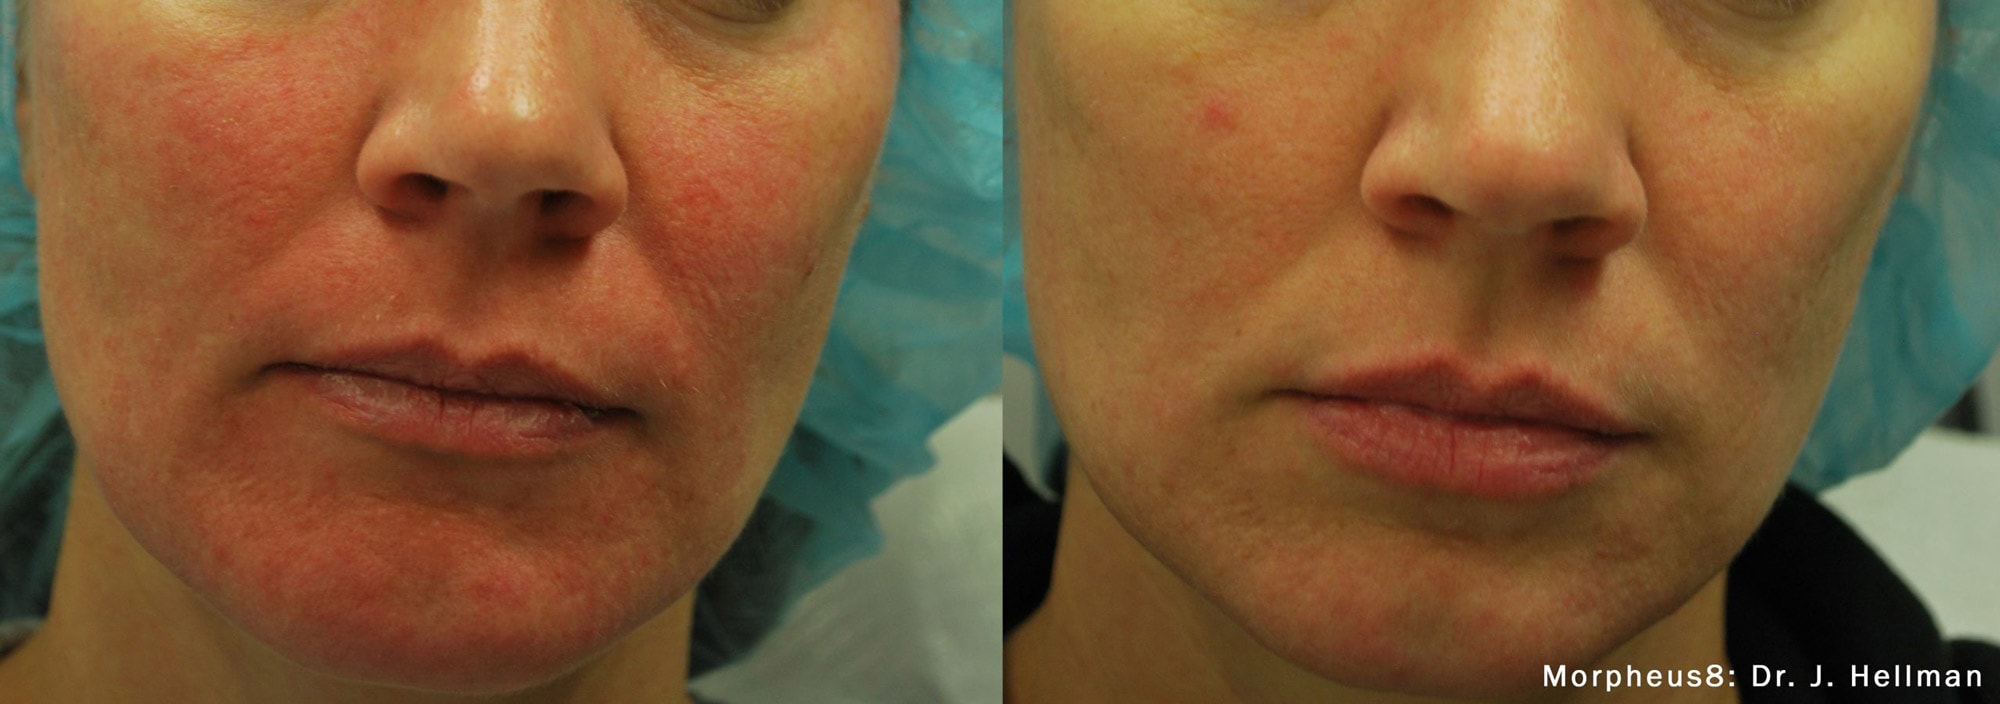 Before and After photos of Morpheus8 treatments reducing the angry redness of an acne outbreak on a woman’s face